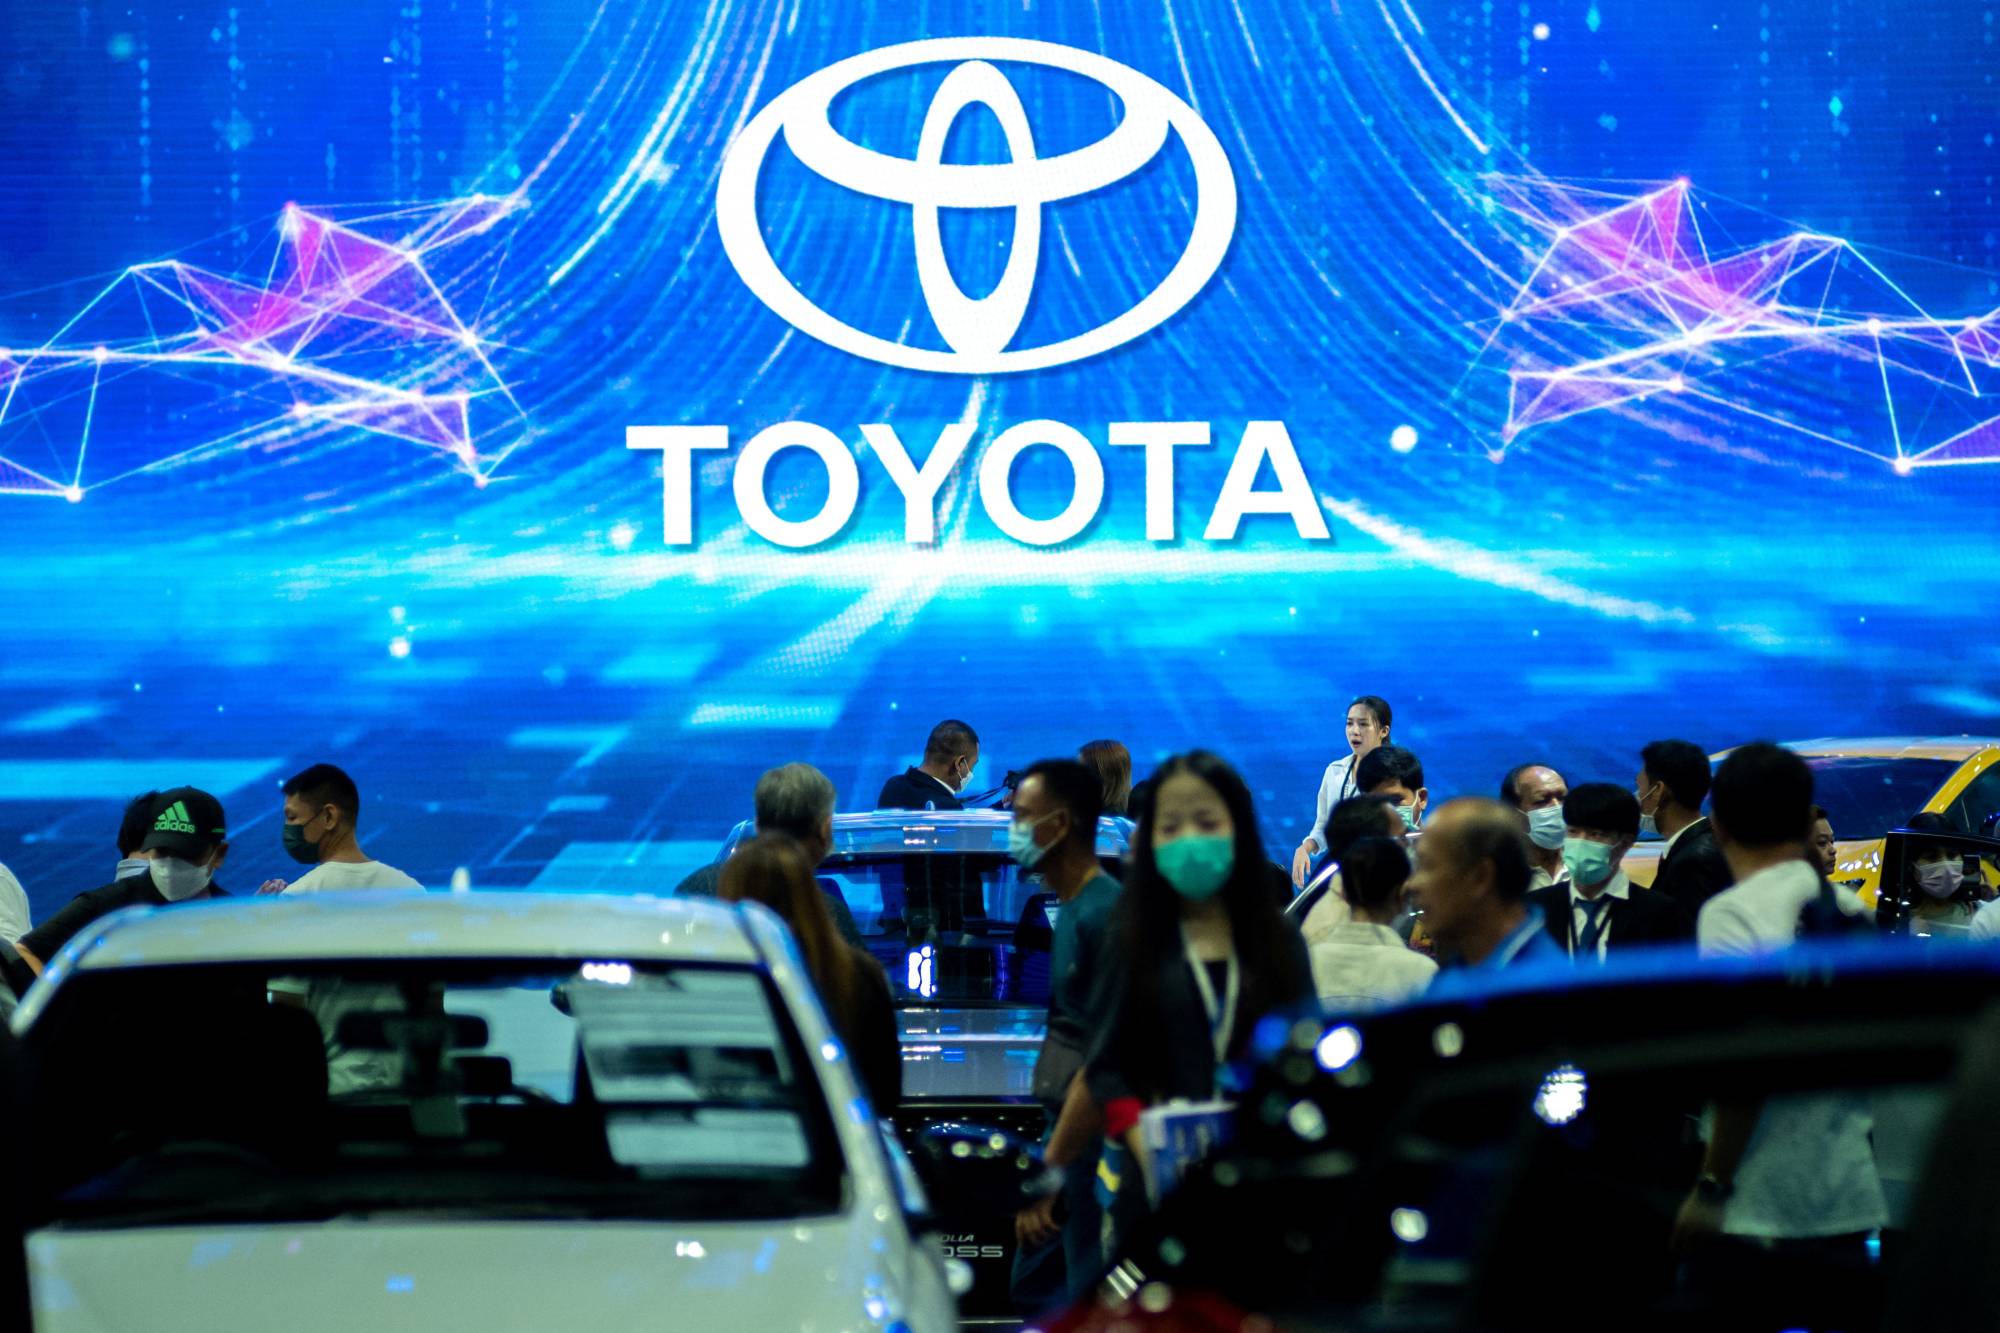 Toyota cars are displayed at an international motor show in Bangkok in March. Toyota's global sales in February hit a record high. | REUTERS